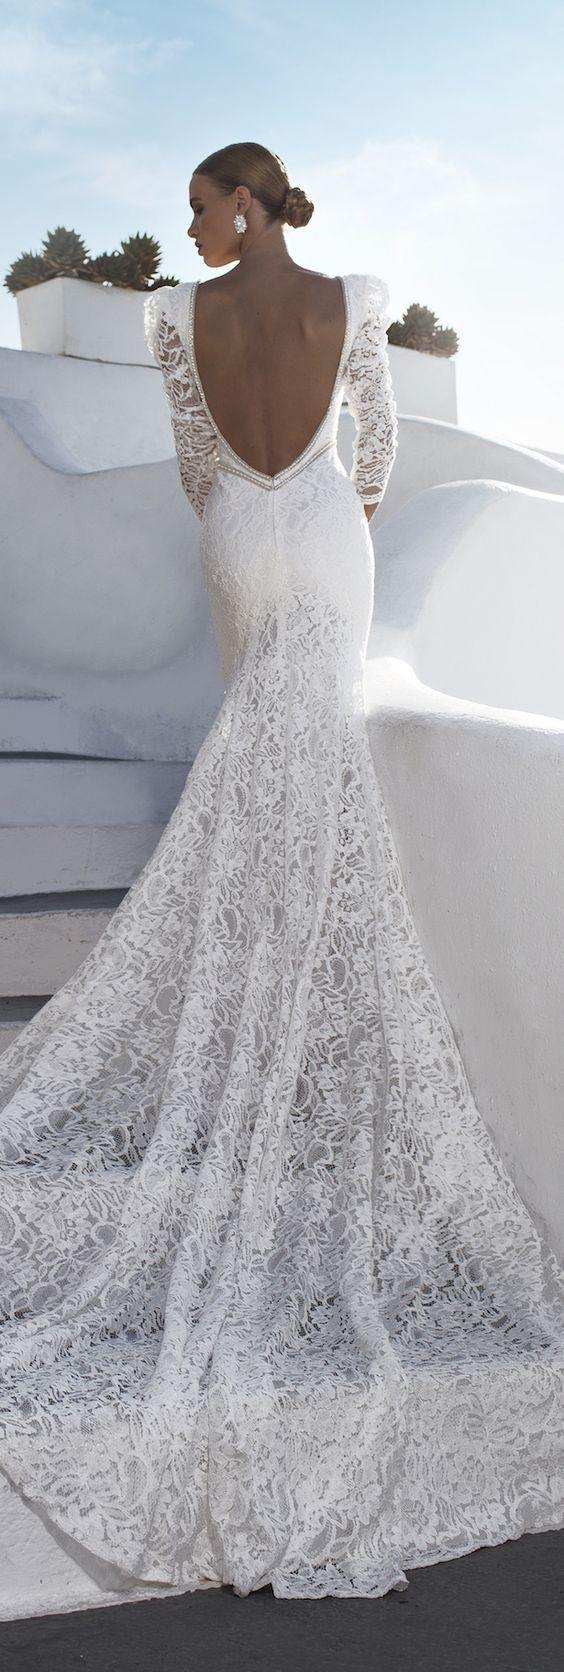 Hochzeit - 50 Beautiful Lace Wedding Dresses To Die For